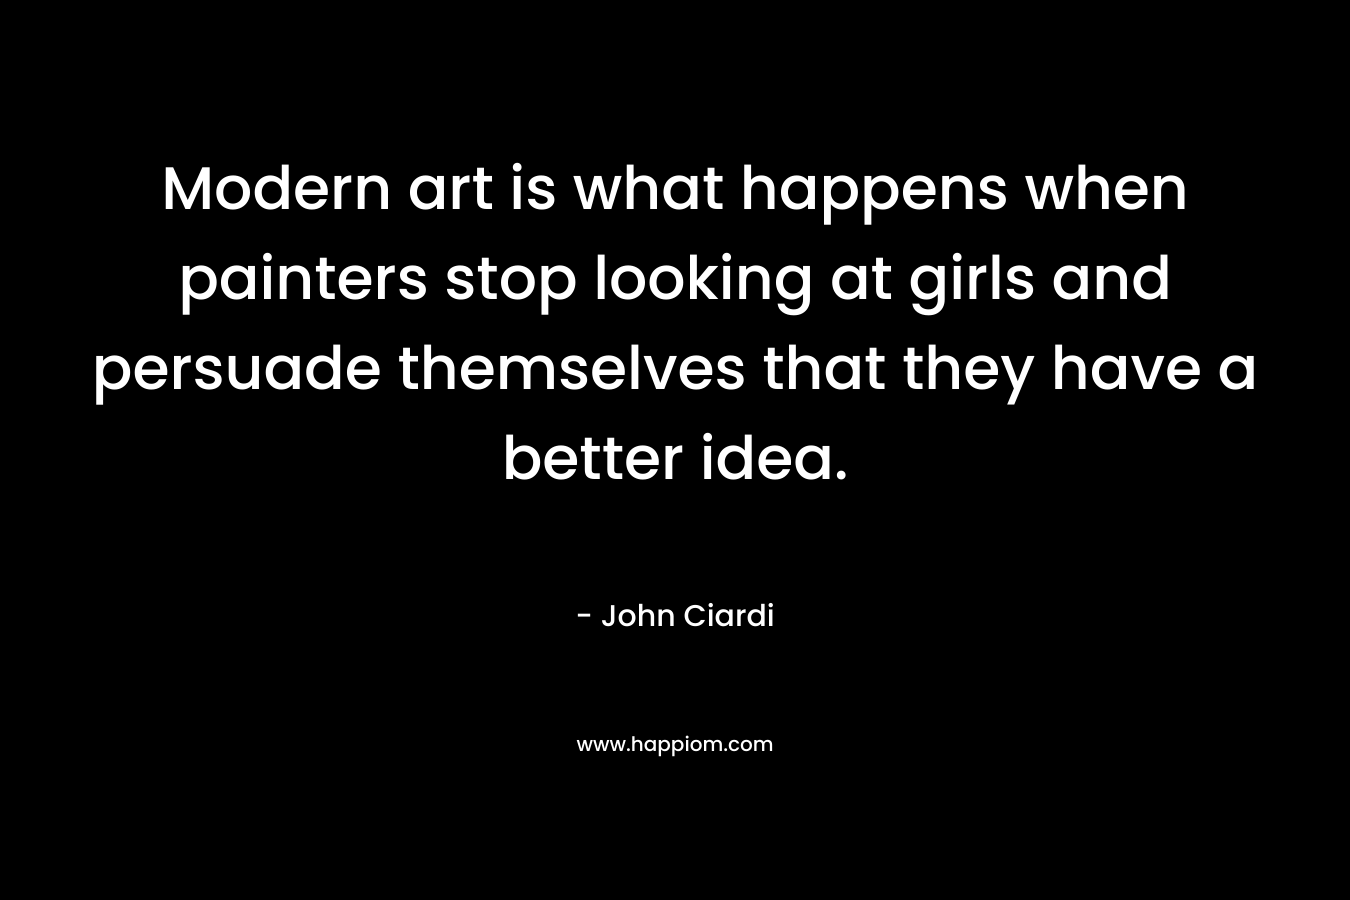 Modern art is what happens when painters stop looking at girls and persuade themselves that they have a better idea. – John Ciardi